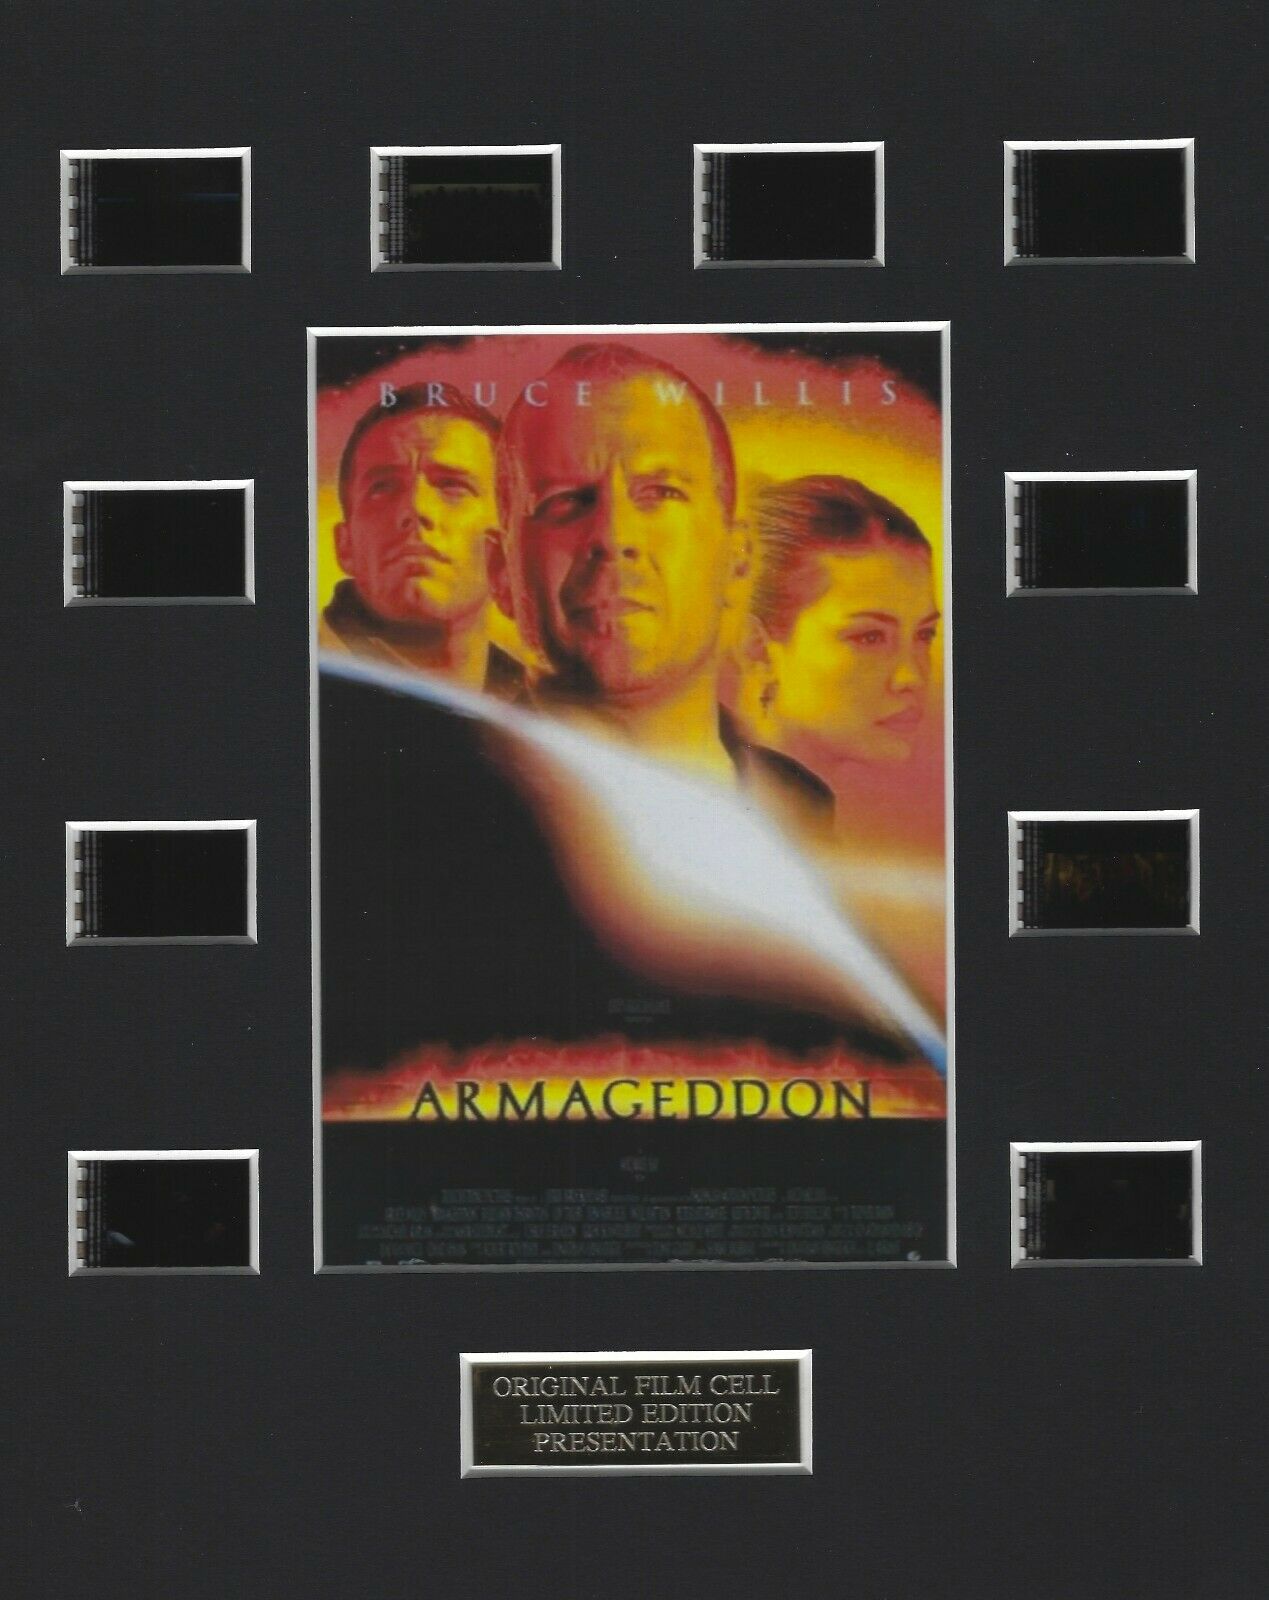 Armageddon (1998) Authentic 35mm Movie Film Cell 8x10 Matted Display - W/coa